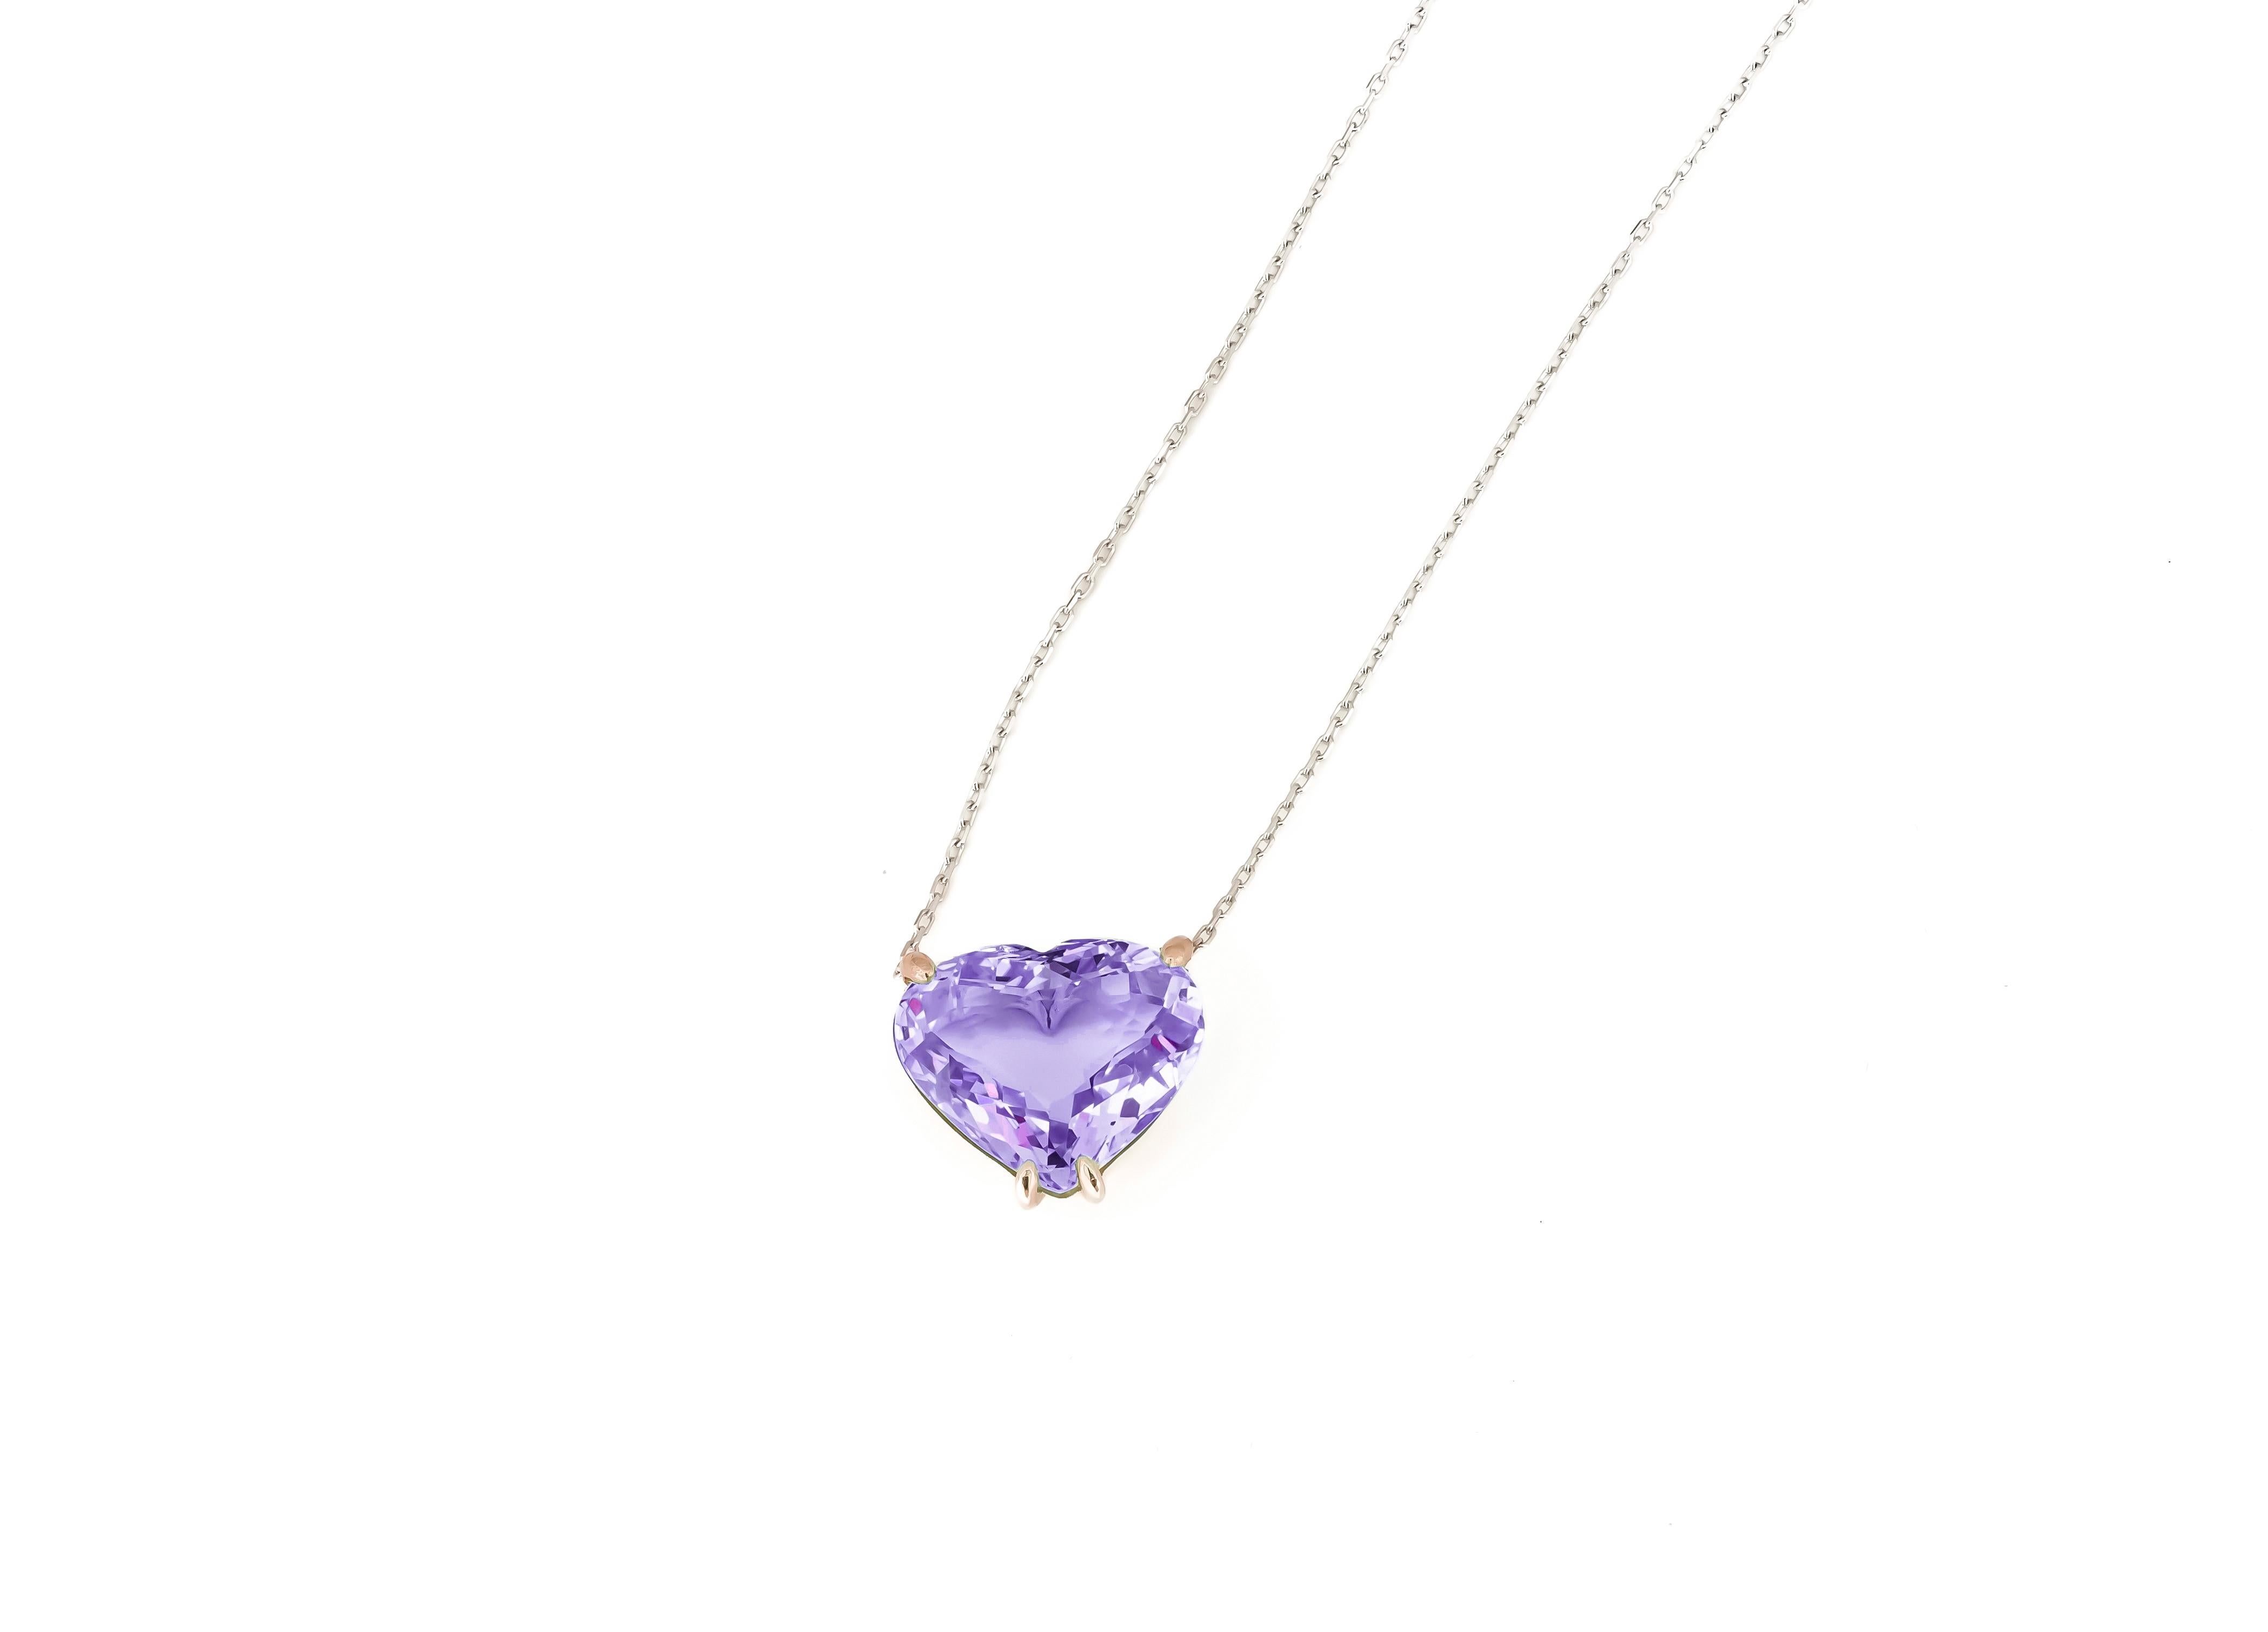 Heart shaped amethyst pendant necklace in 14k gold. 
Amethyst gold necklace pendant. Heart shape amethyst pendant. Genuine amethyst pendant. Minimalist Amethyst Heart Pendant Necklace. Valentines Gifts for Her Jewelry.  

Metal: 14 kt gold
Weight: 3